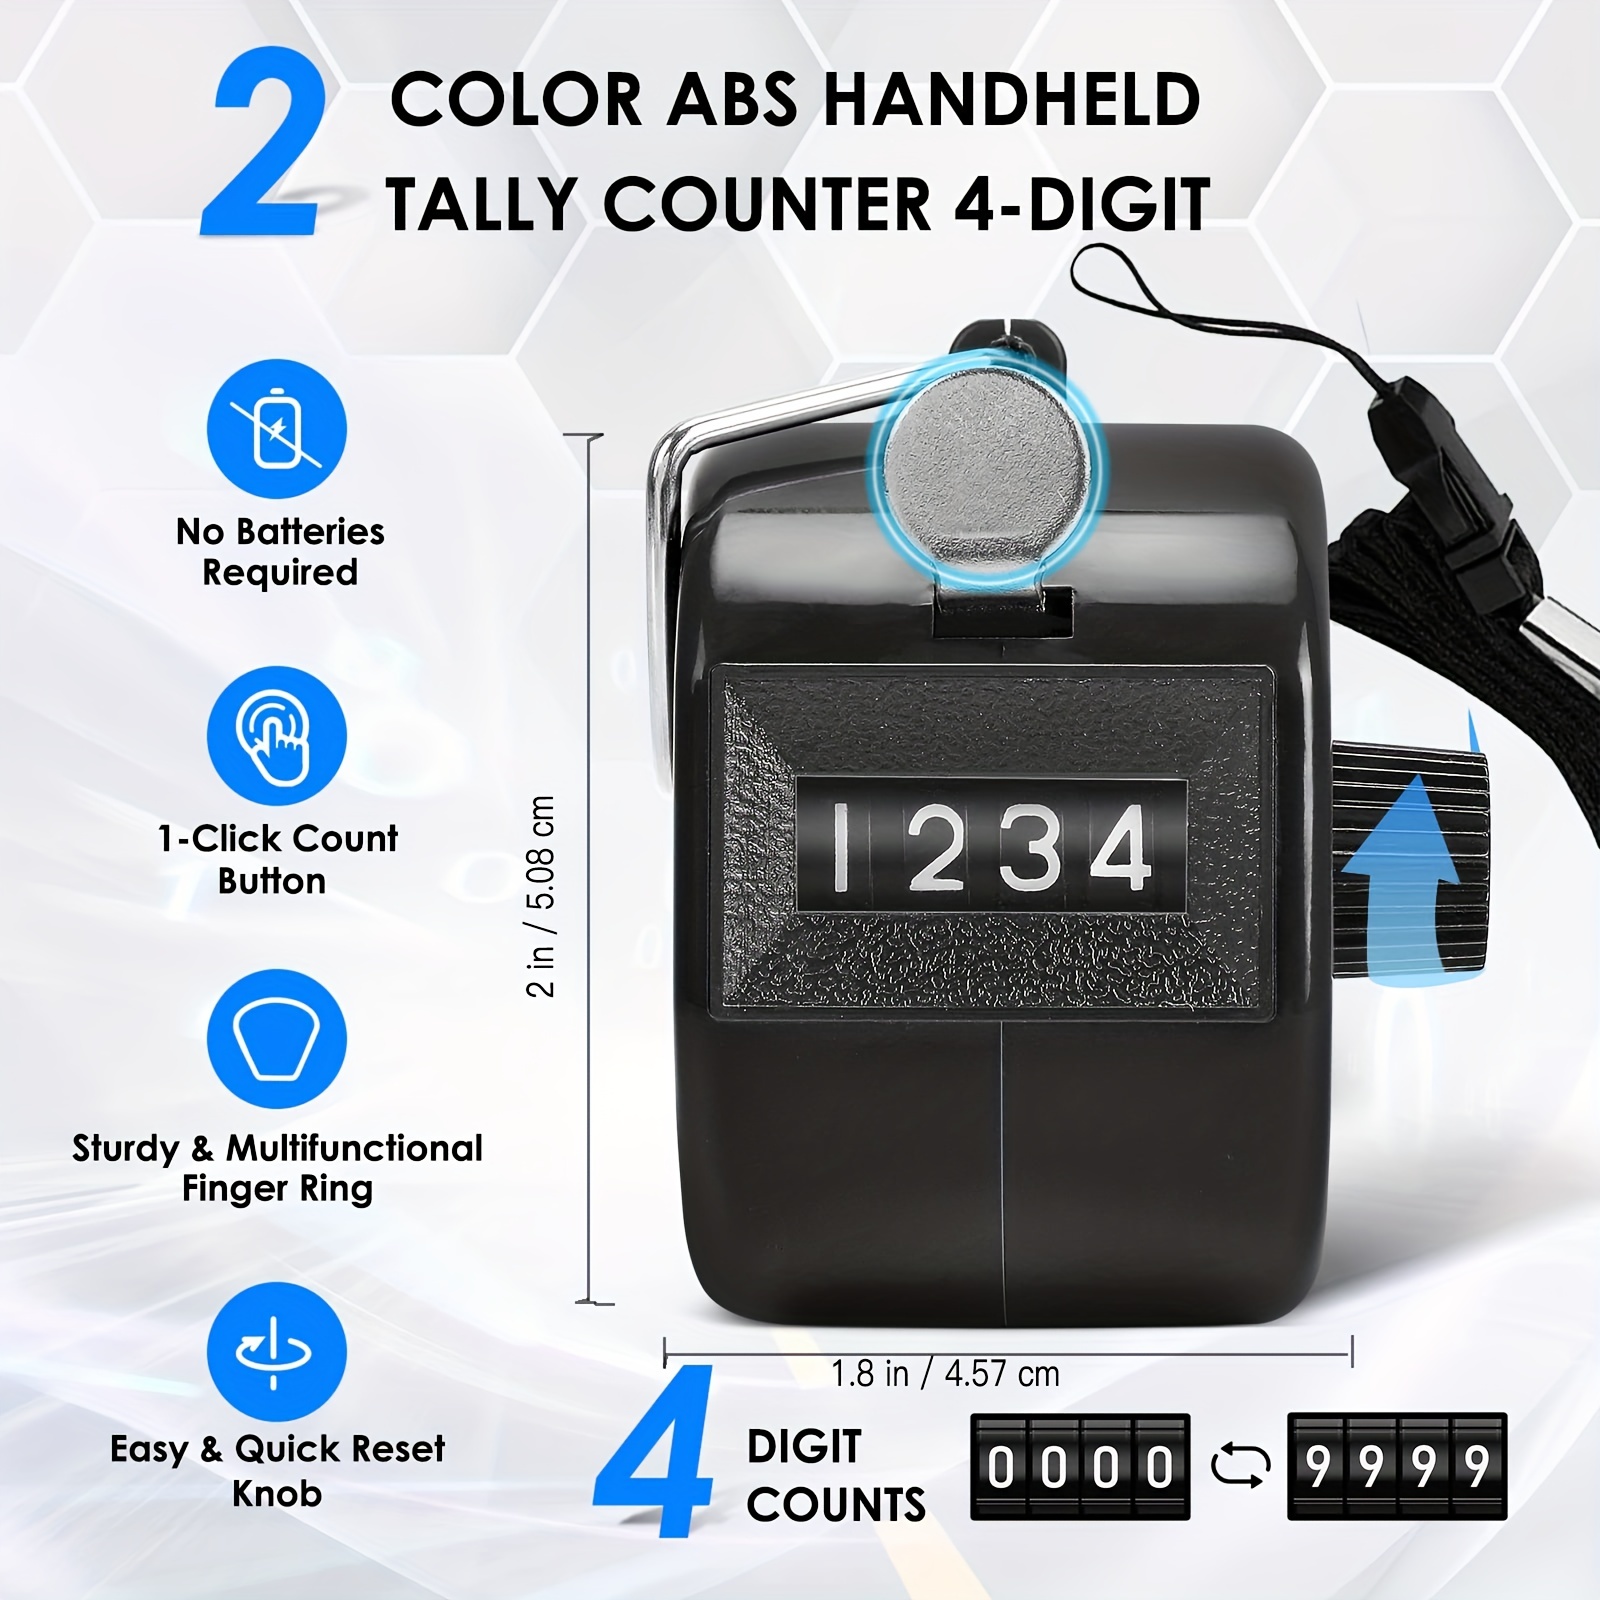 Metal Hand Tally Counter 4-digit Tally Counters Mechanical Palm Counter  Clicker Counter Handheld Pitch Click Counter Number Count For Row, People,  Gol